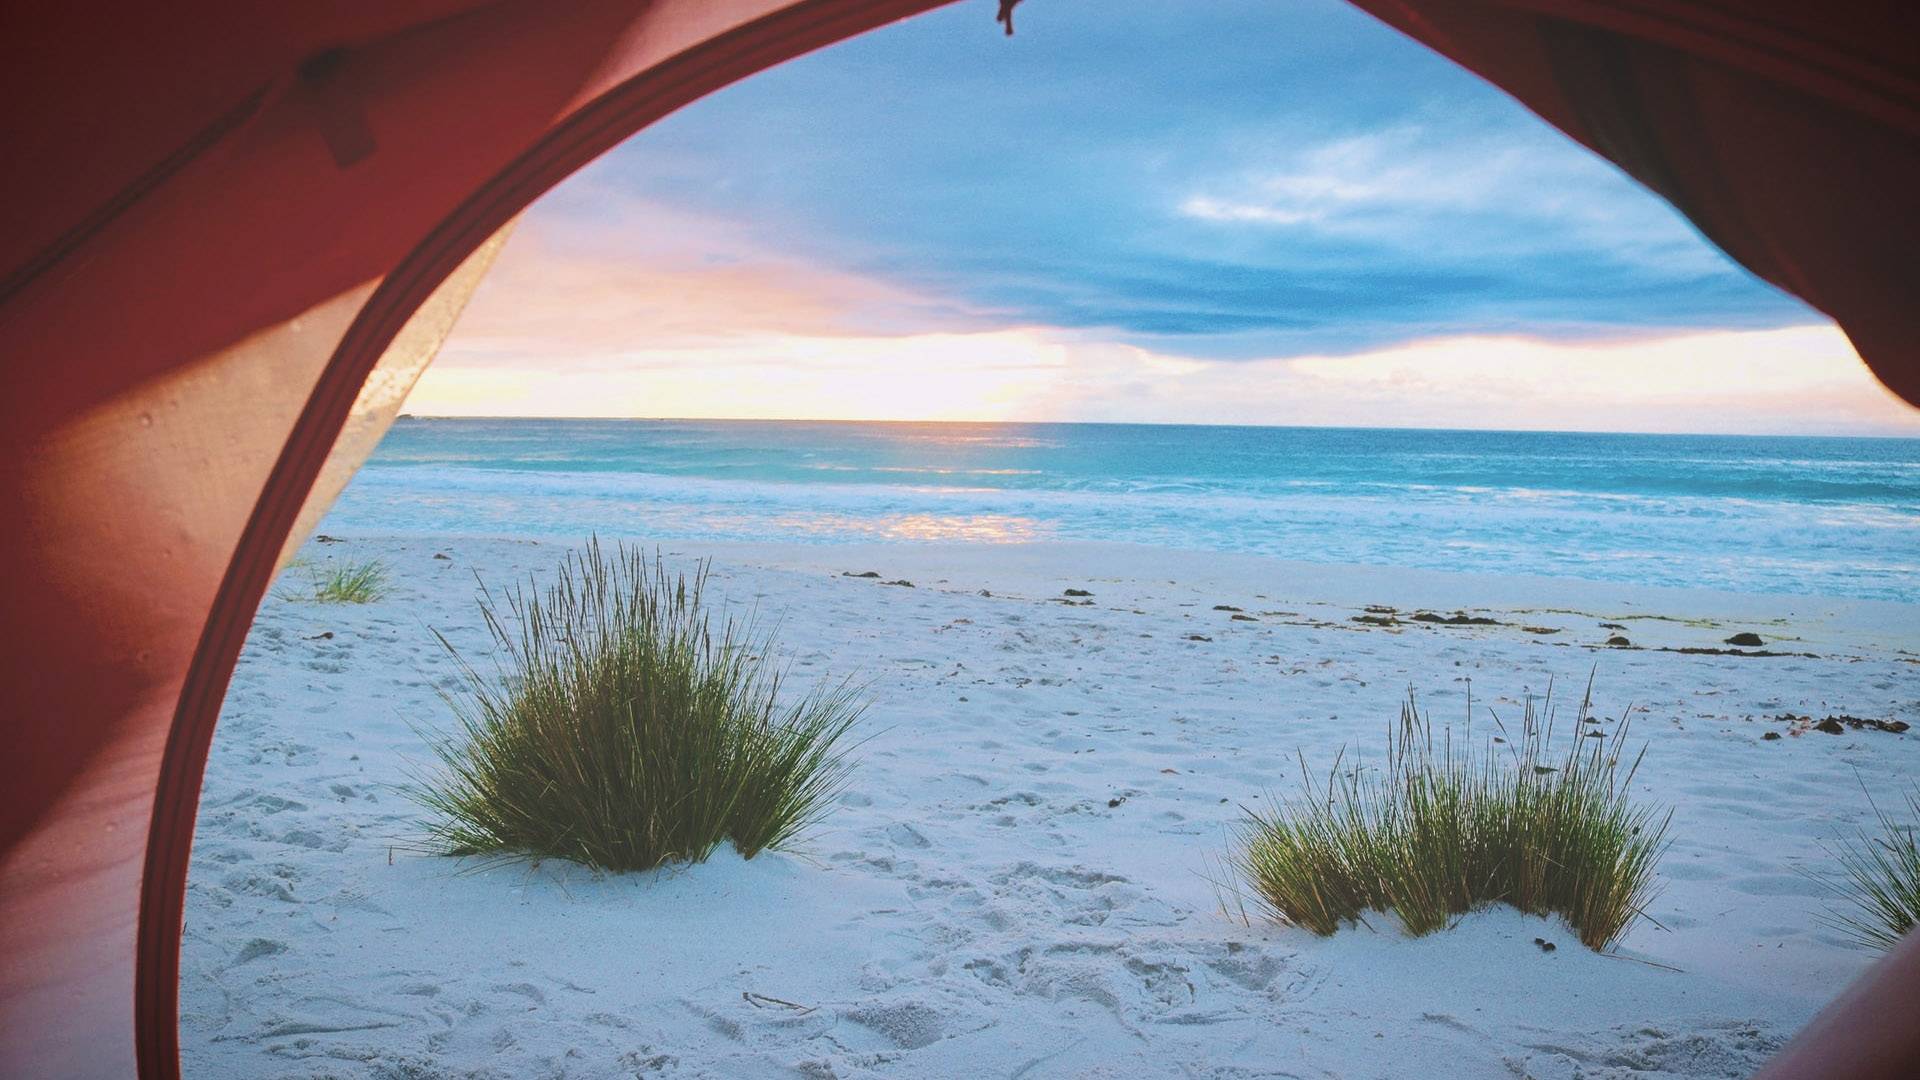 Inside of tent on the beach